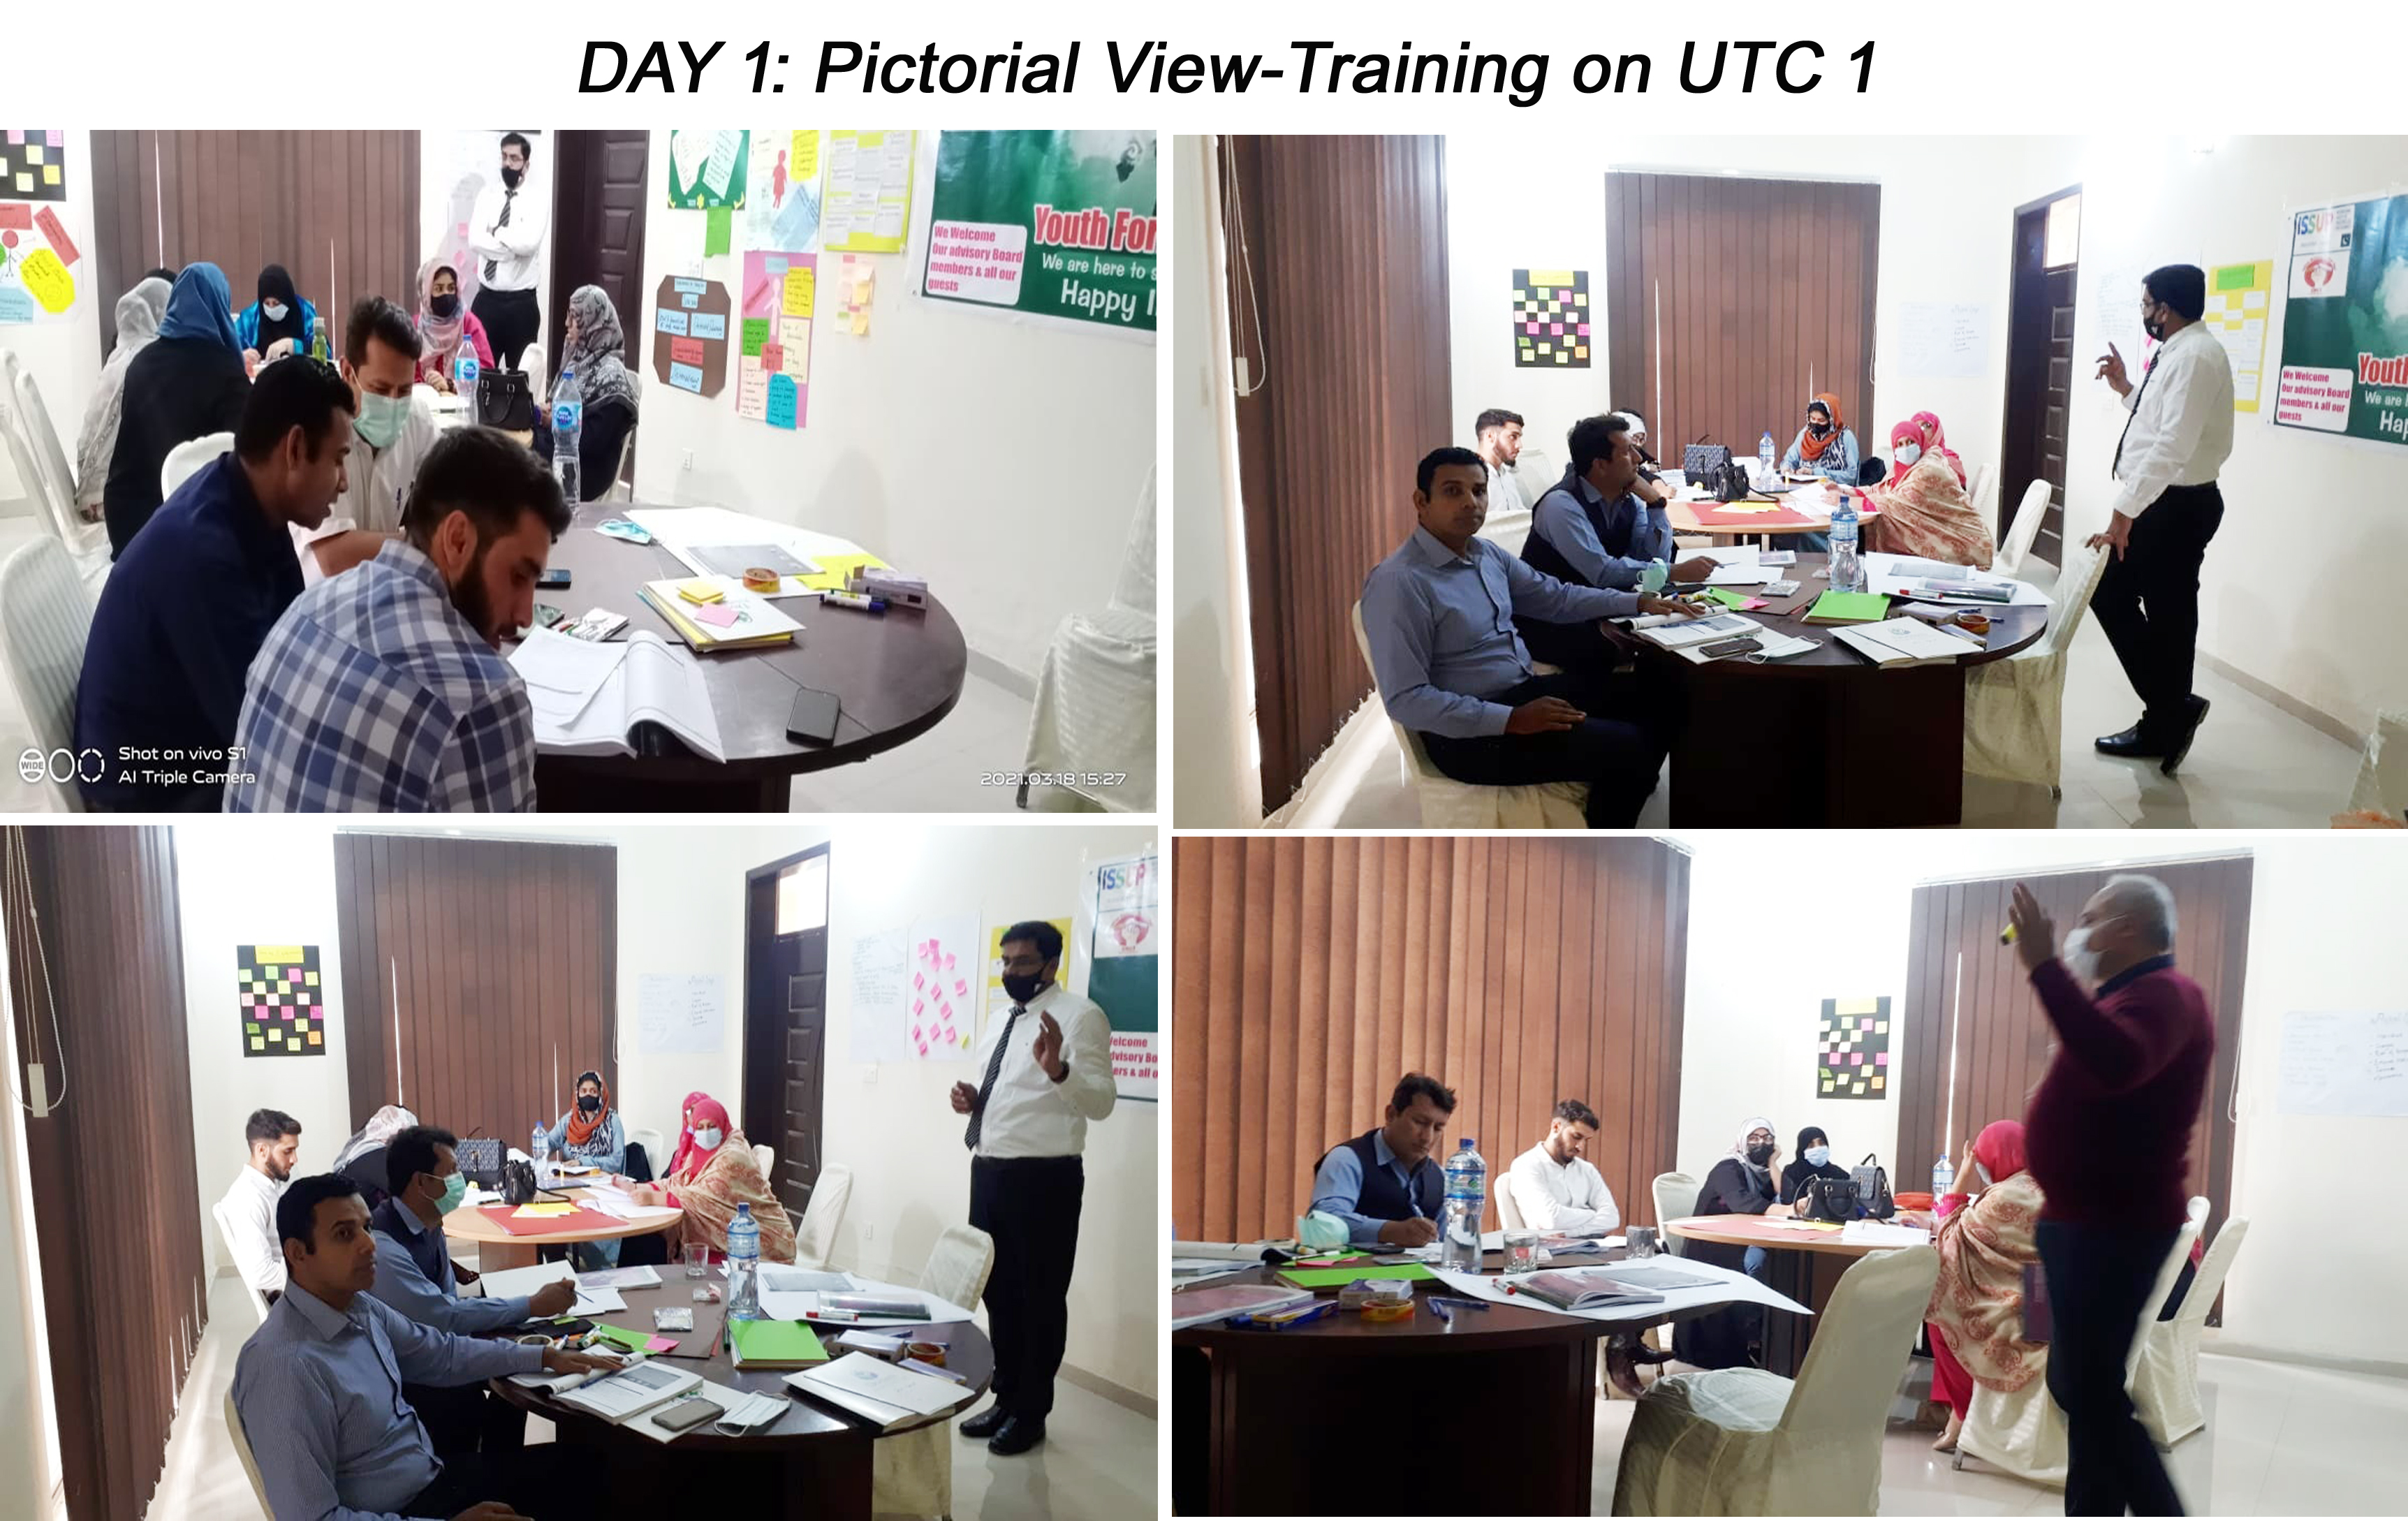 DAY 1: Pictorial View-Training on UTC 1